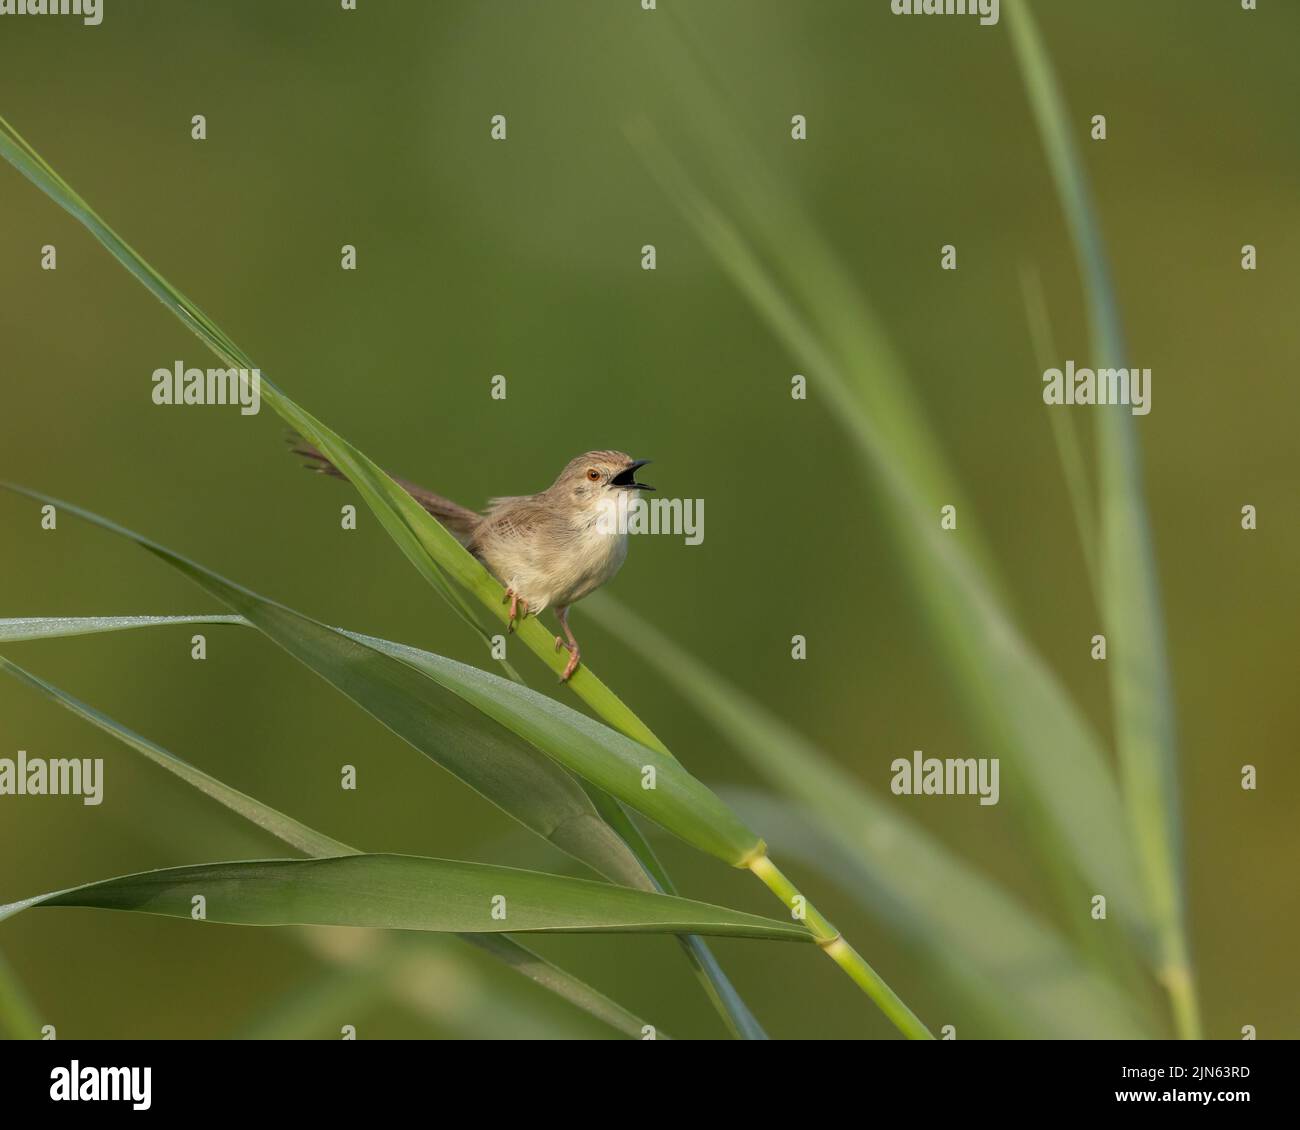 Graceful Prinia perched on blade of grass making warning calls, Bahrain Stock Photo